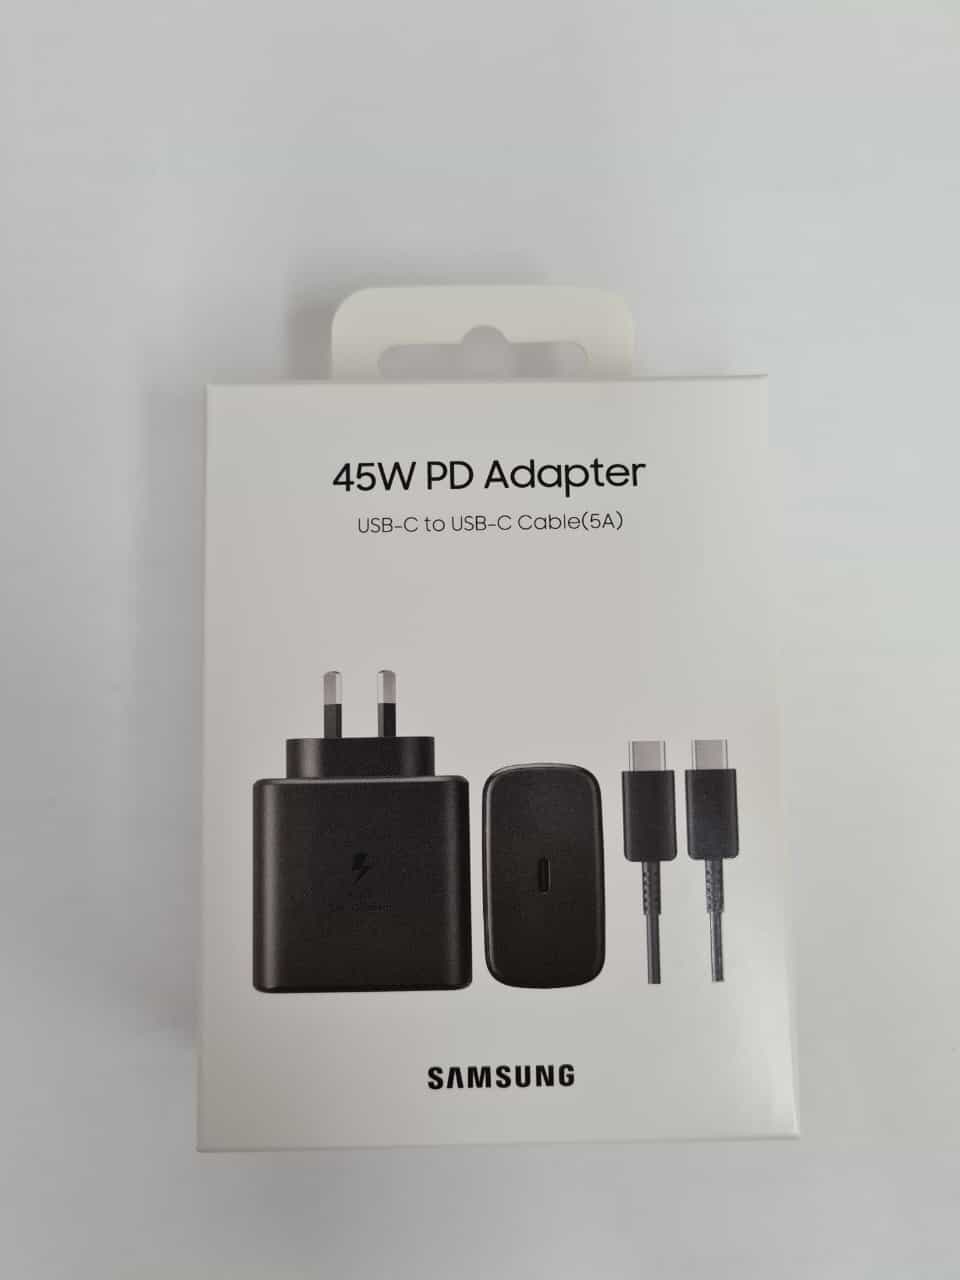 Samsung 45W PD AC SUPER fast Charger 2.0 AFC USB-C - Black (Includes Cable)